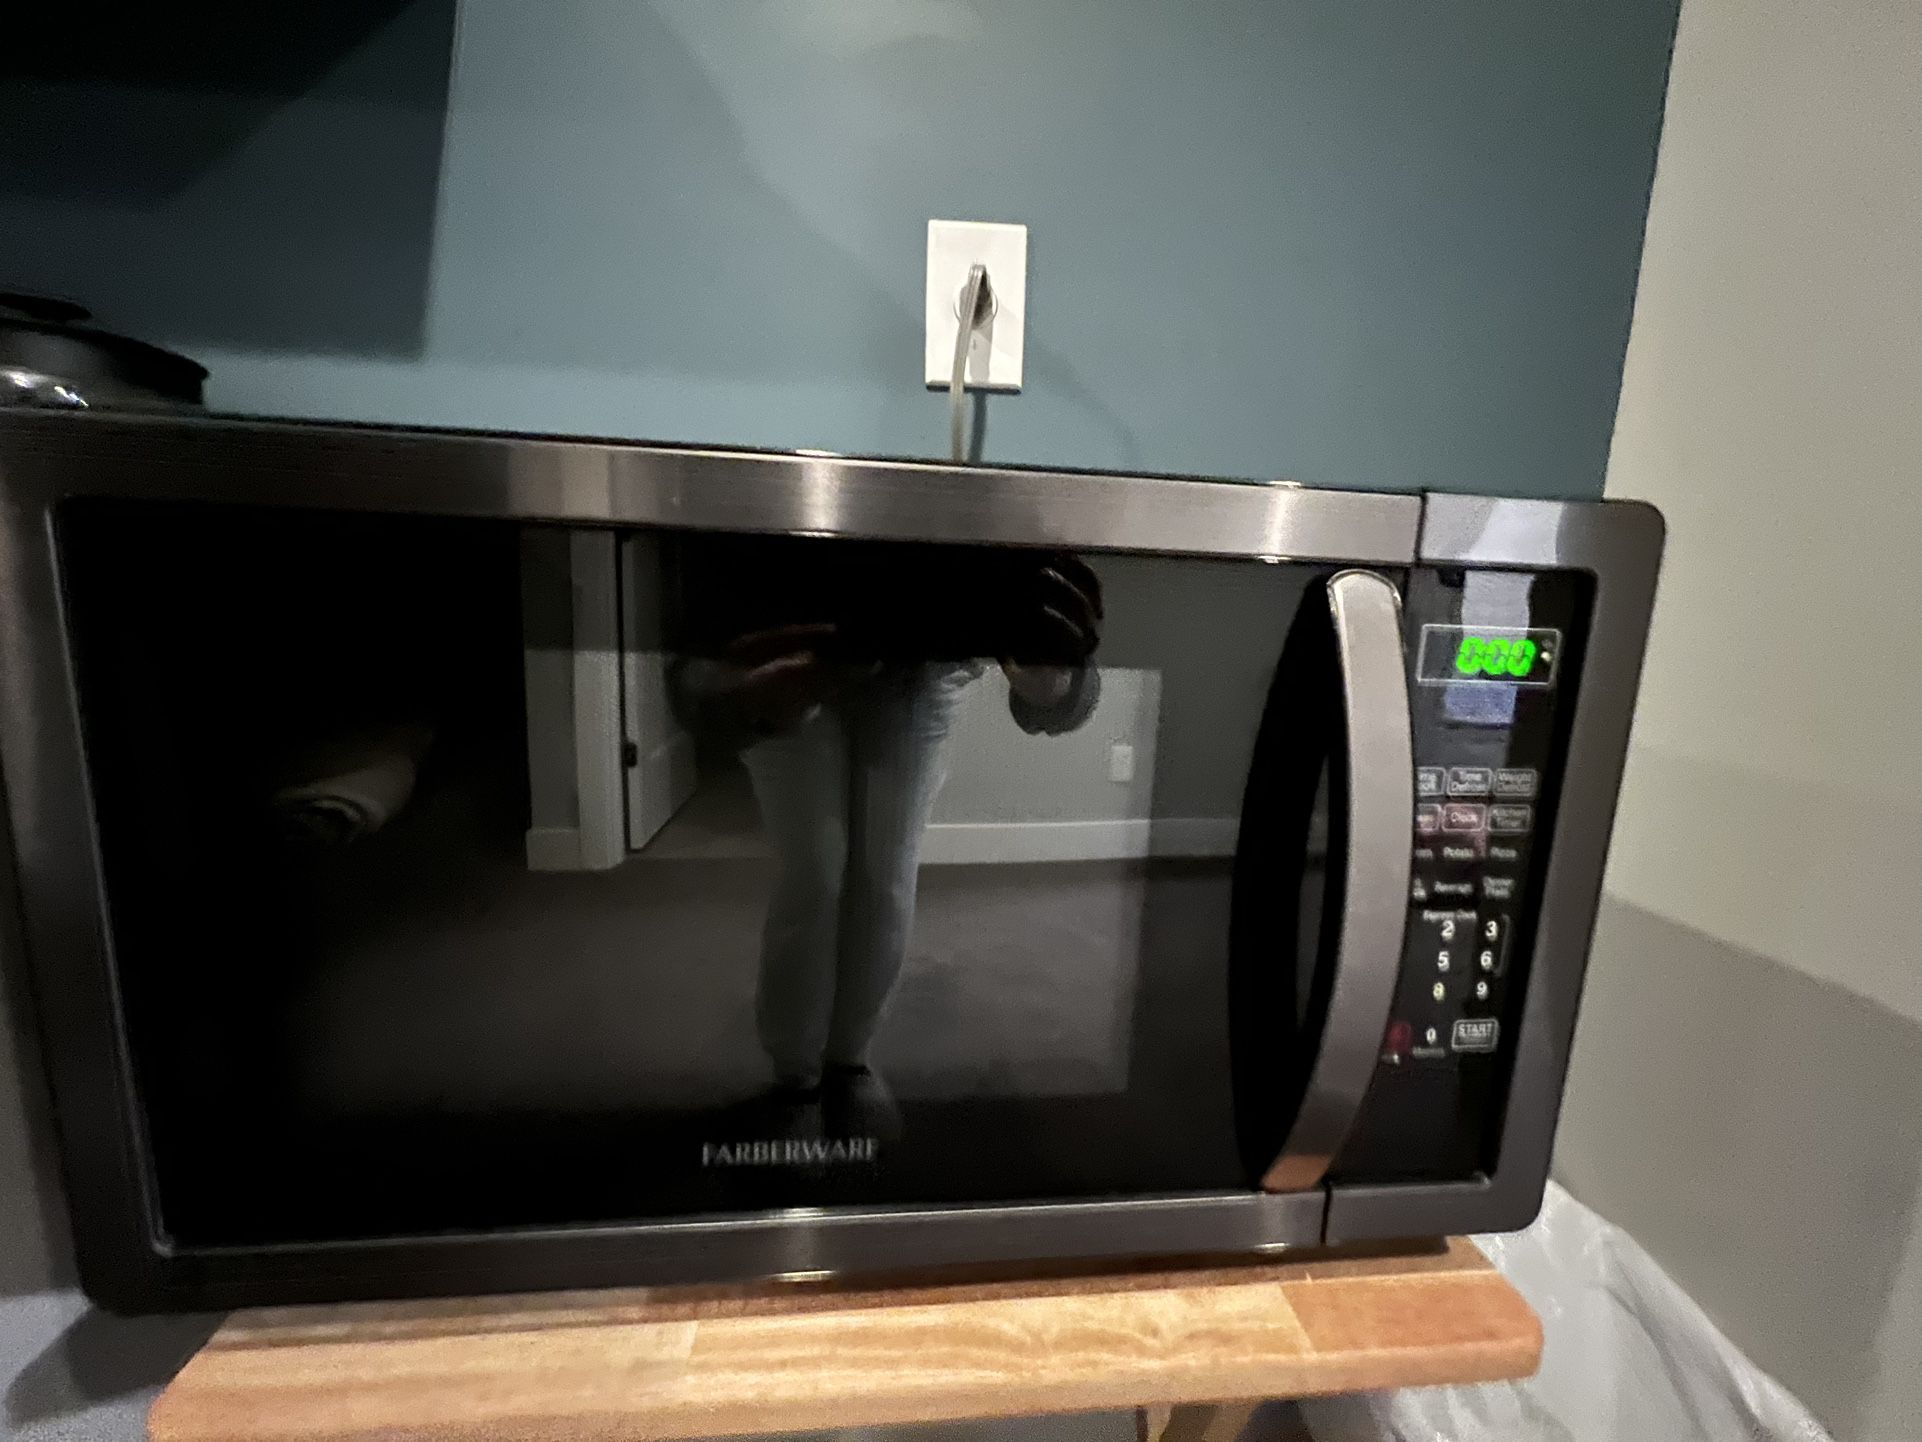 Brand New Microwave. Never Used 